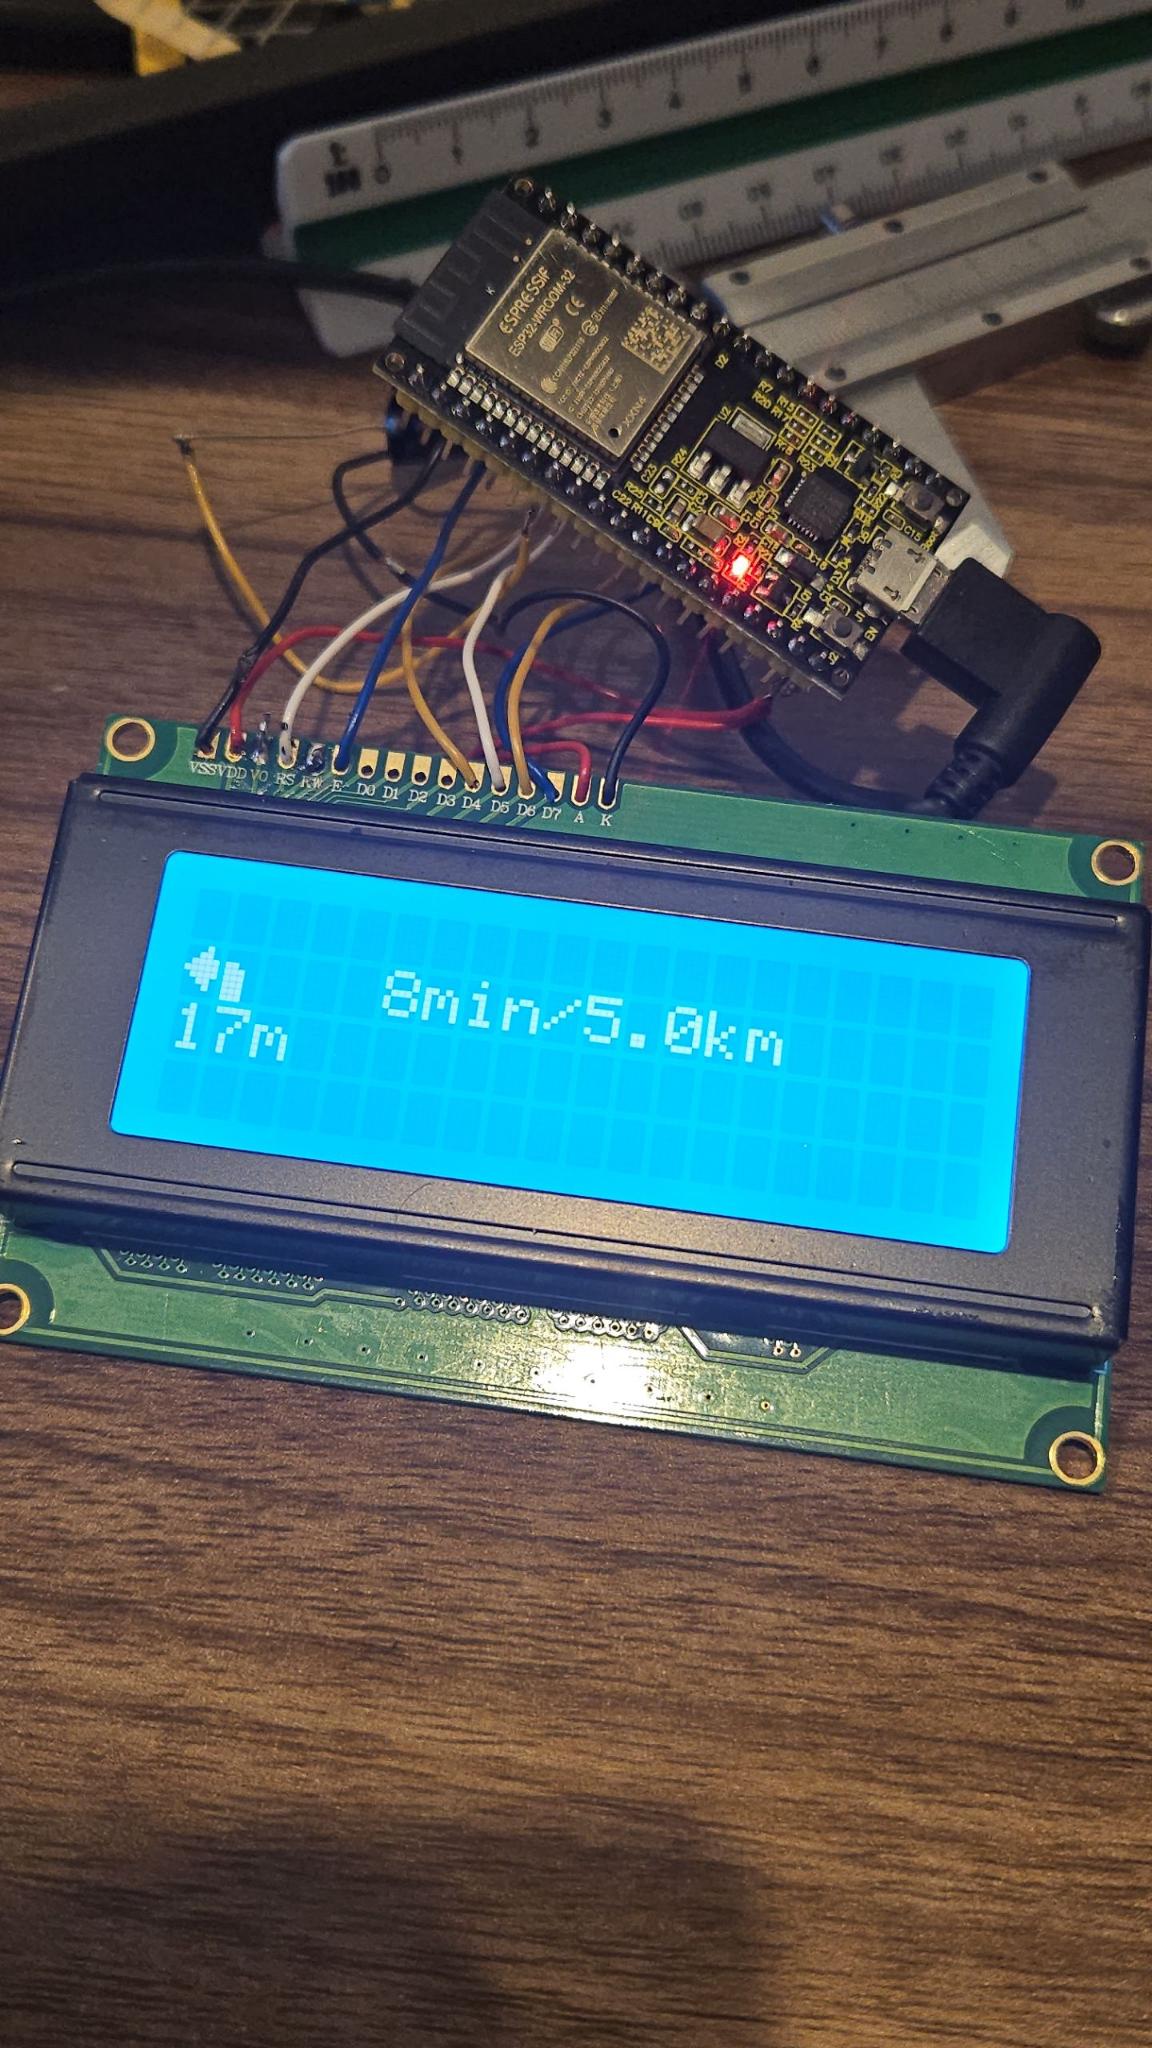 A 20x4 display showing directions